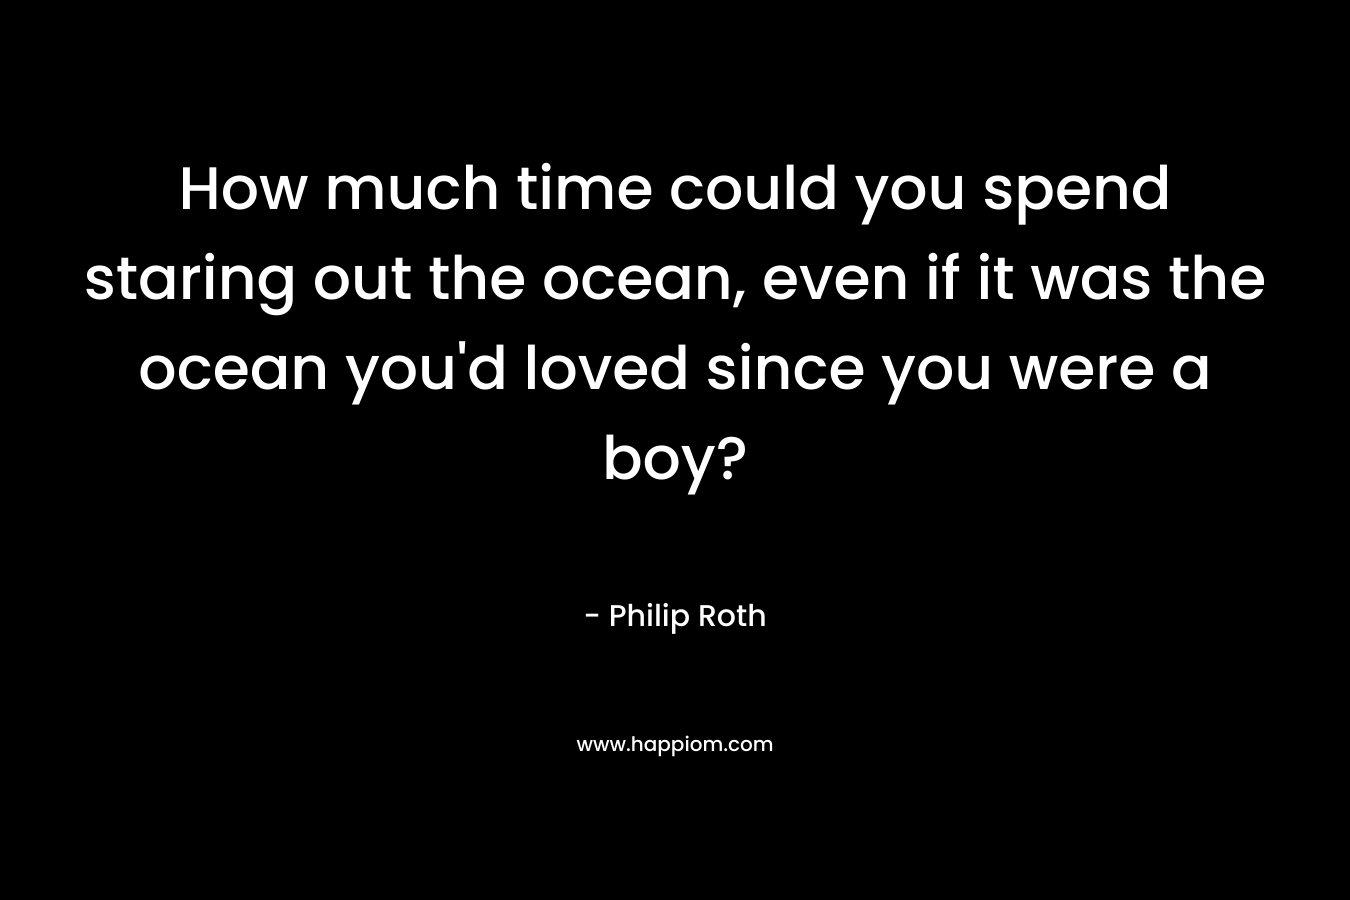 How much time could you spend staring out the ocean, even if it was the ocean you’d loved since you were a boy? – Philip Roth